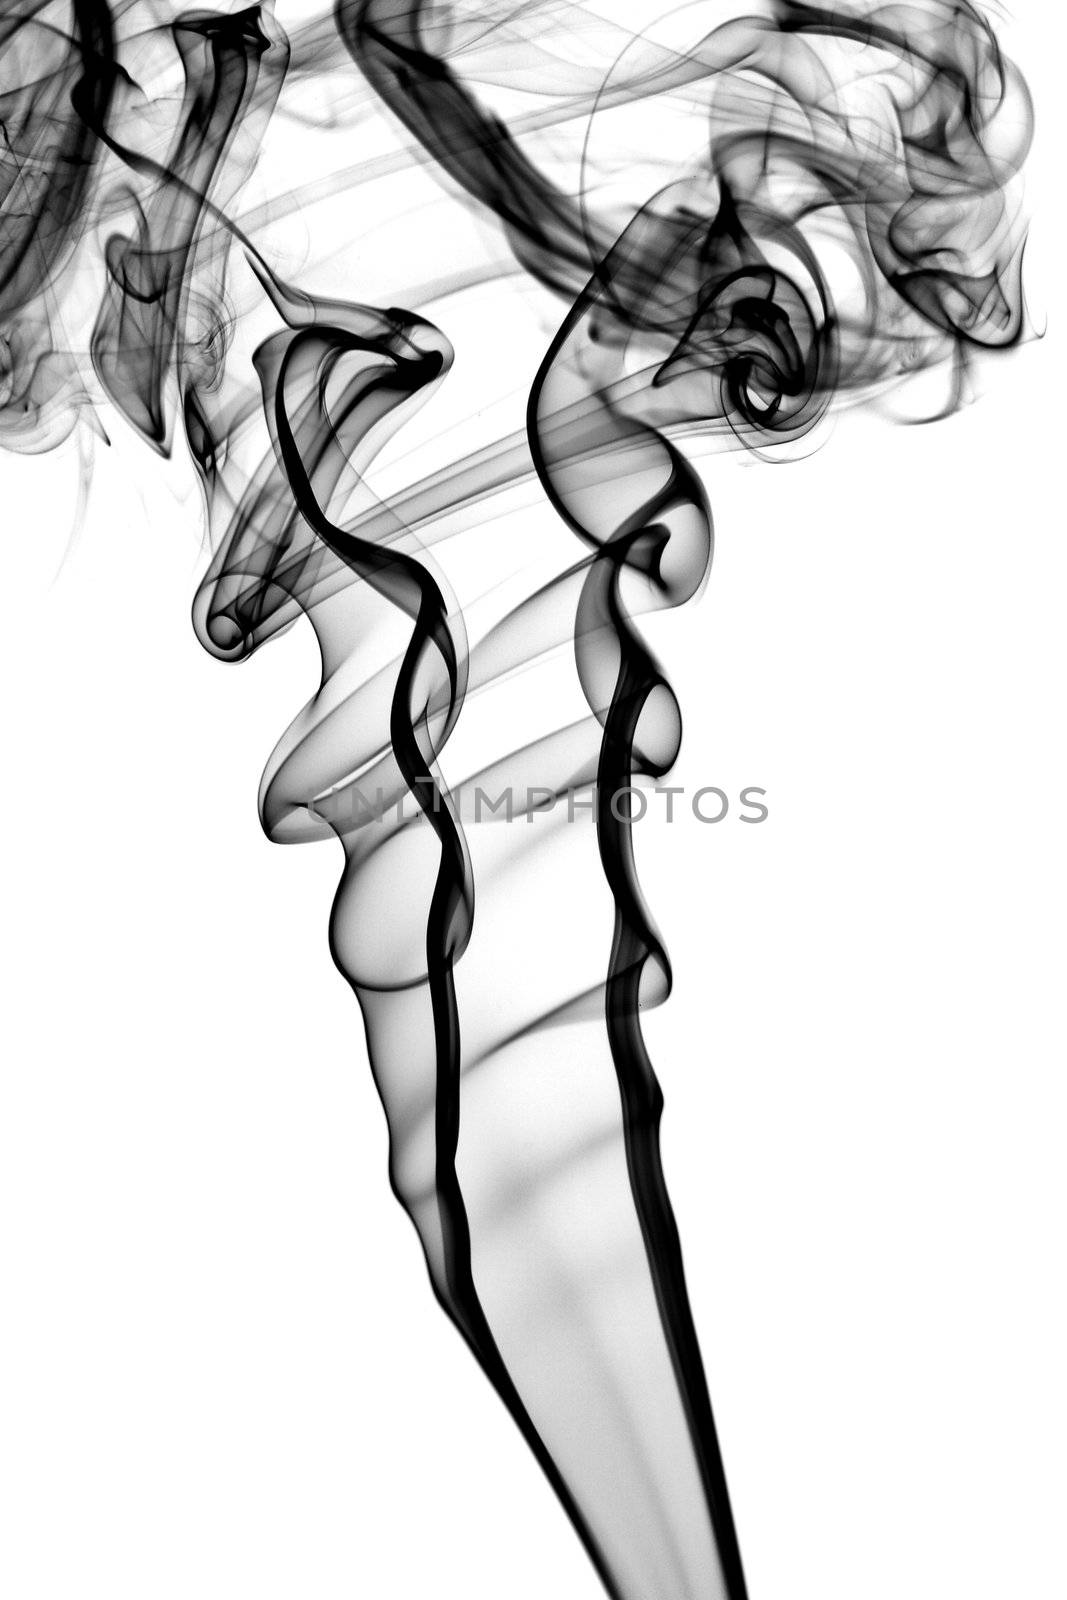 Abstract black smoke. Isolated on white background